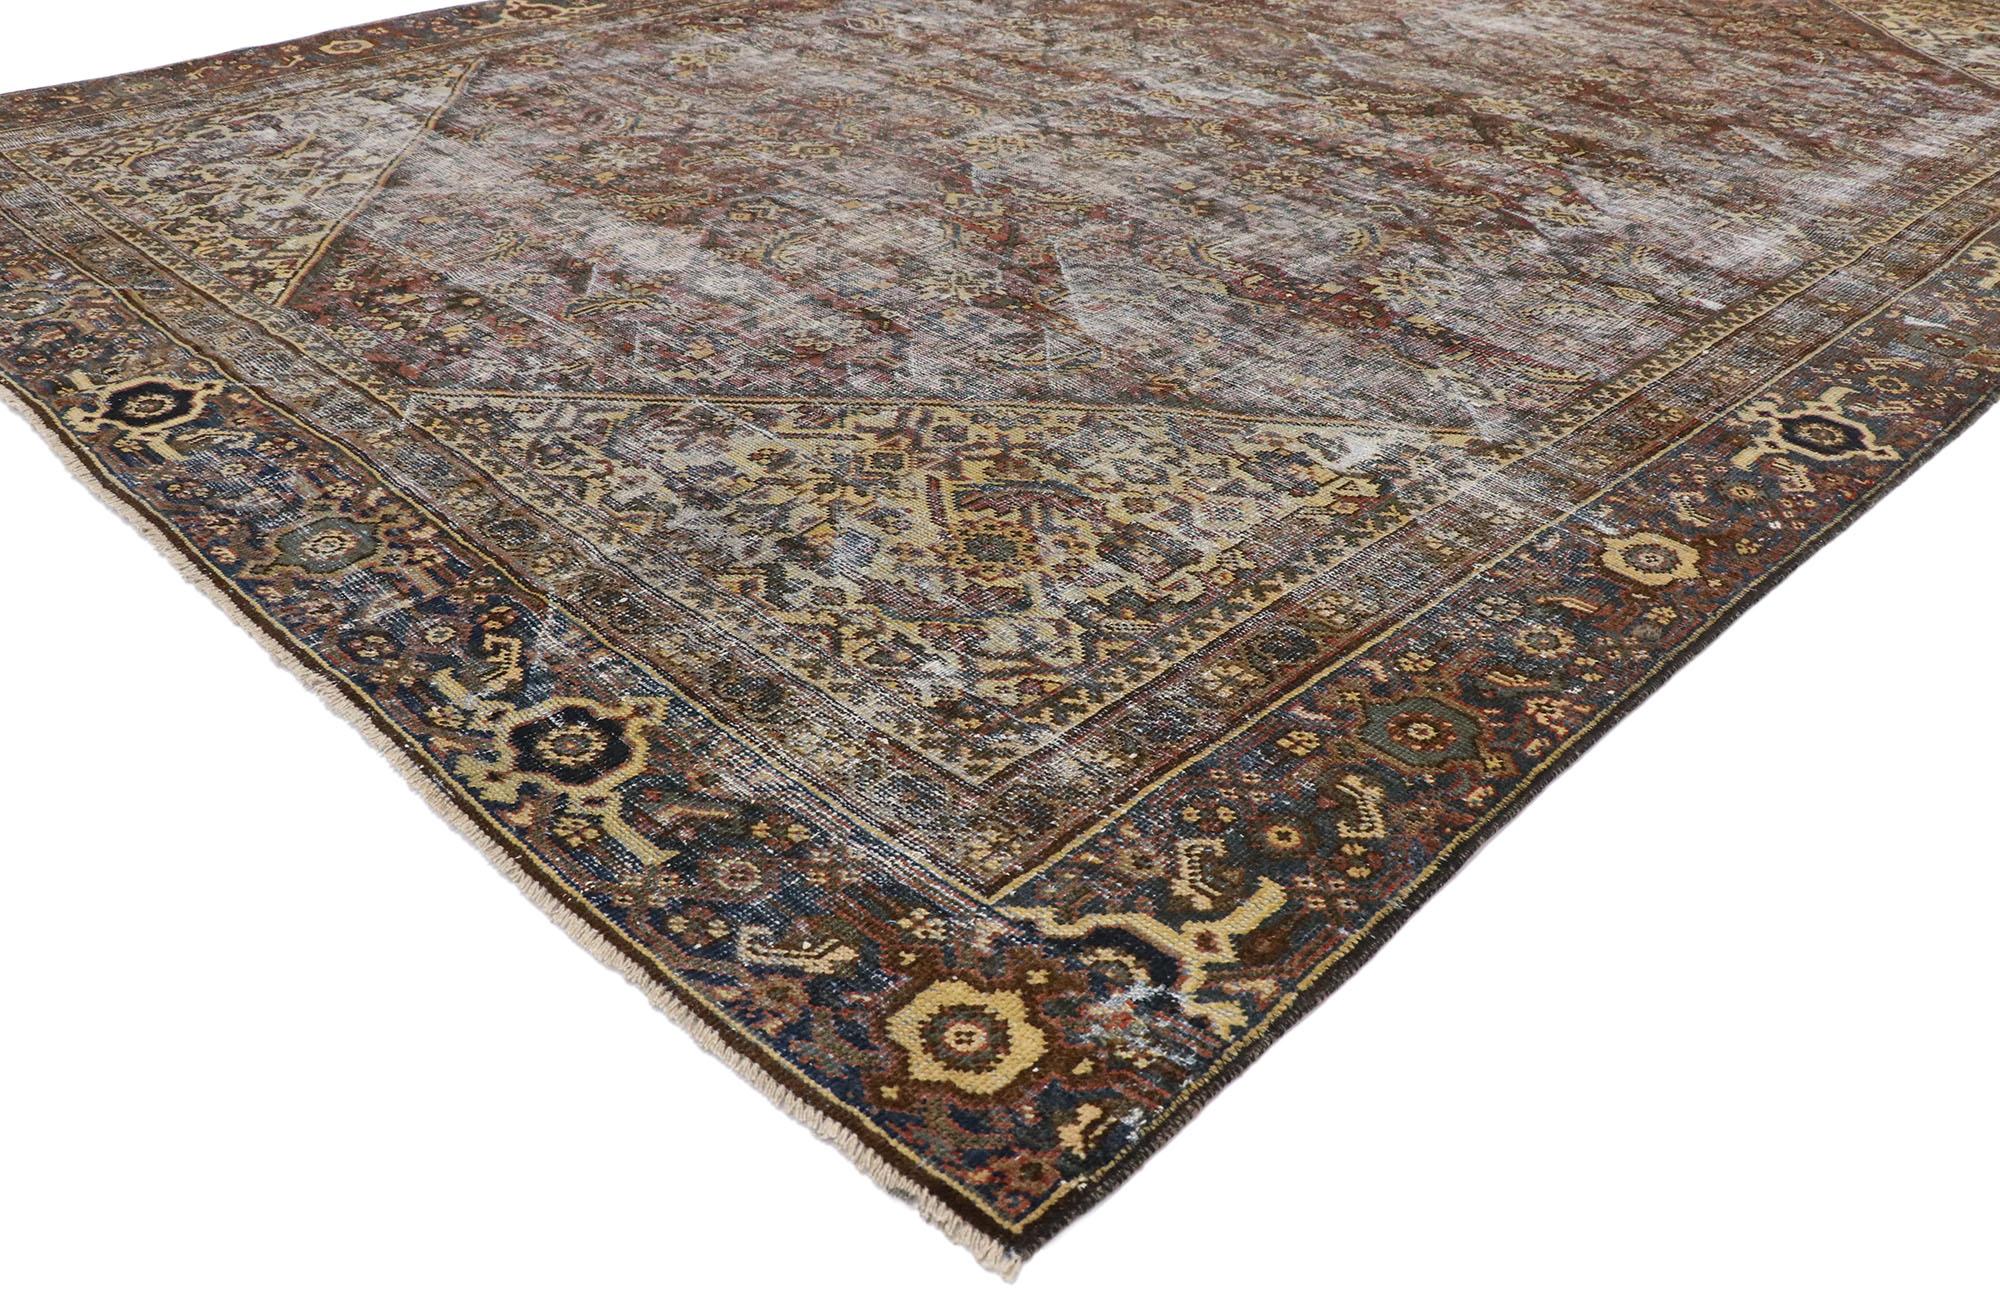  Distressed Antique Persian Mahal Rug with Traditional English Rustic Style  1